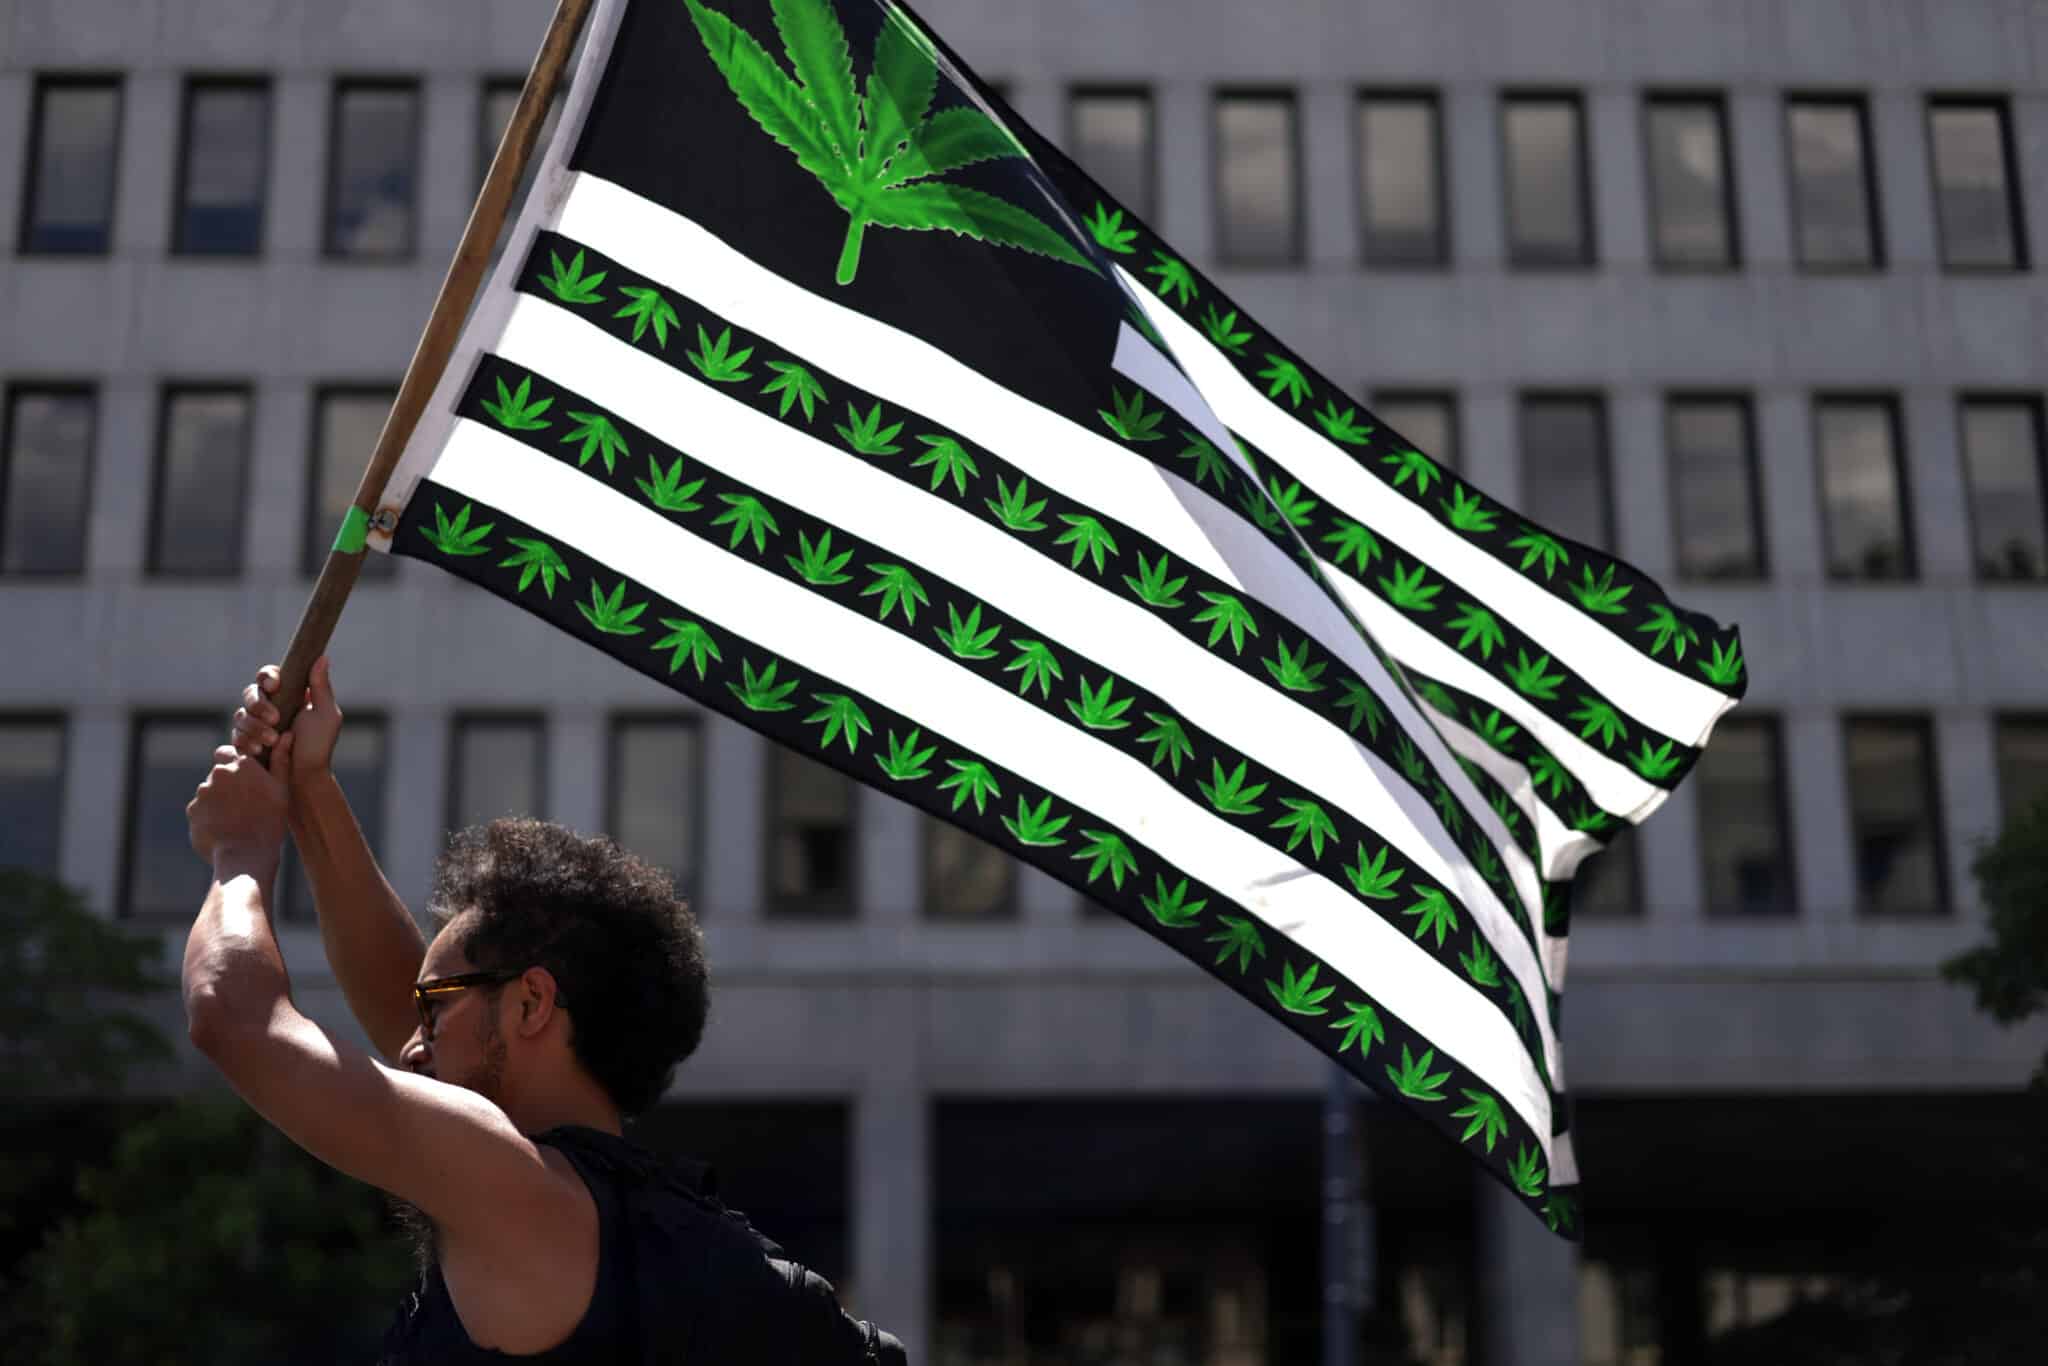 WASHINGTON, DC - JULY 04:  A marijuana activist holds a flag during a march on Independence Day on July 4, 2021 in Washington, DC. Members of the group Fourth of July Hemp Coalition gathered outside the White House for its annual protest on marijuana prohibition which the group said it dated back to more than 50 years ago during Nixon Administration.  (Photo by Alex Wong/Getty Images)